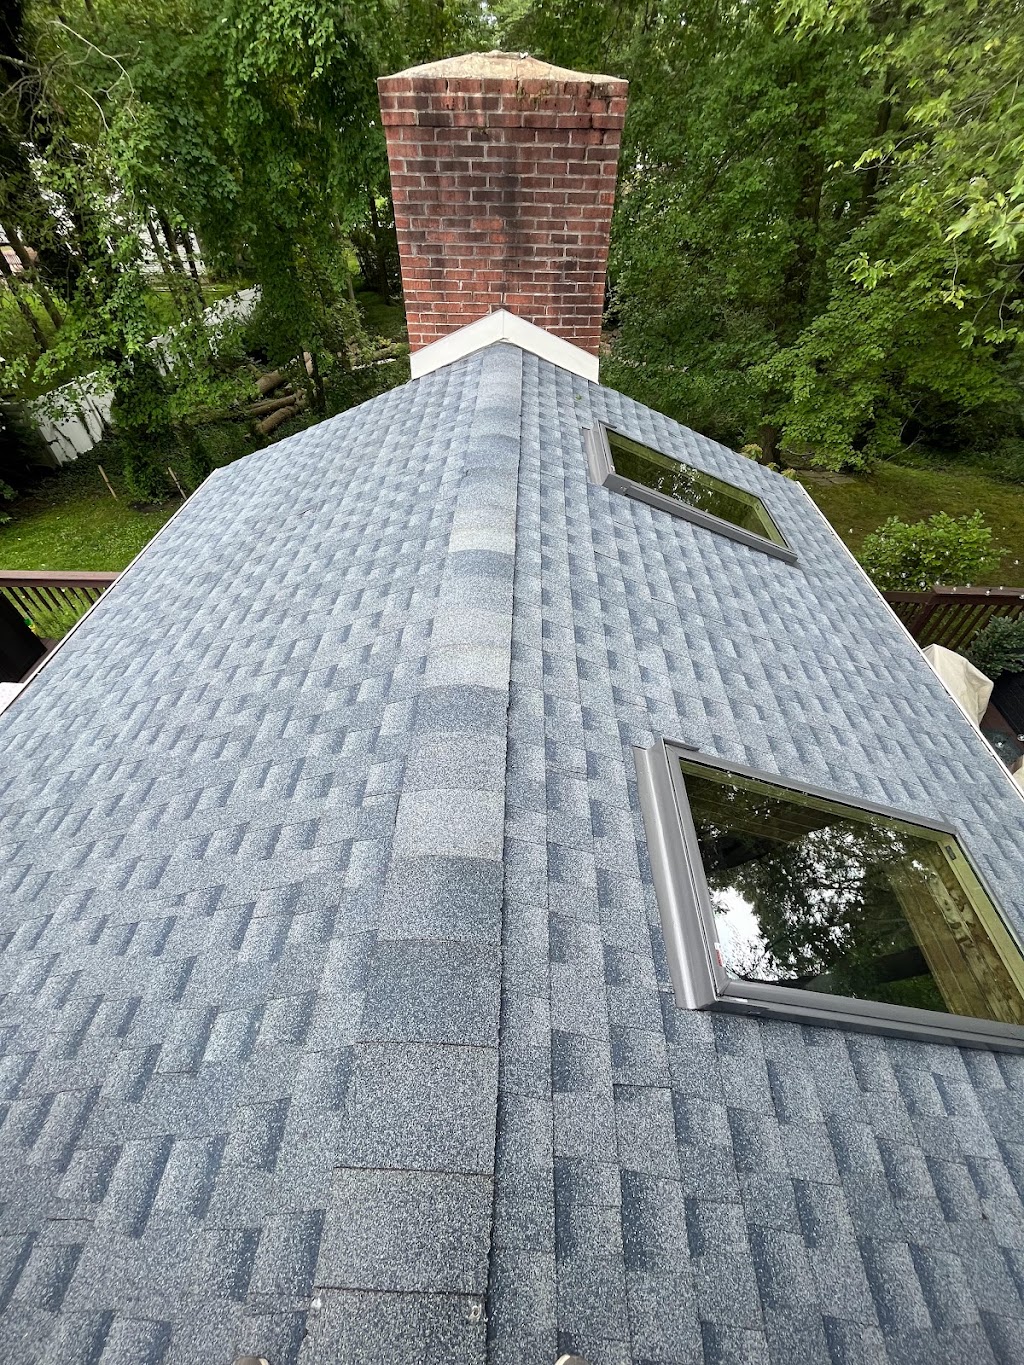 Tom Clark Roofing llc | 112 Rockwood Rd, Newtown Square, PA 19073 | Phone: (484) 802-7808